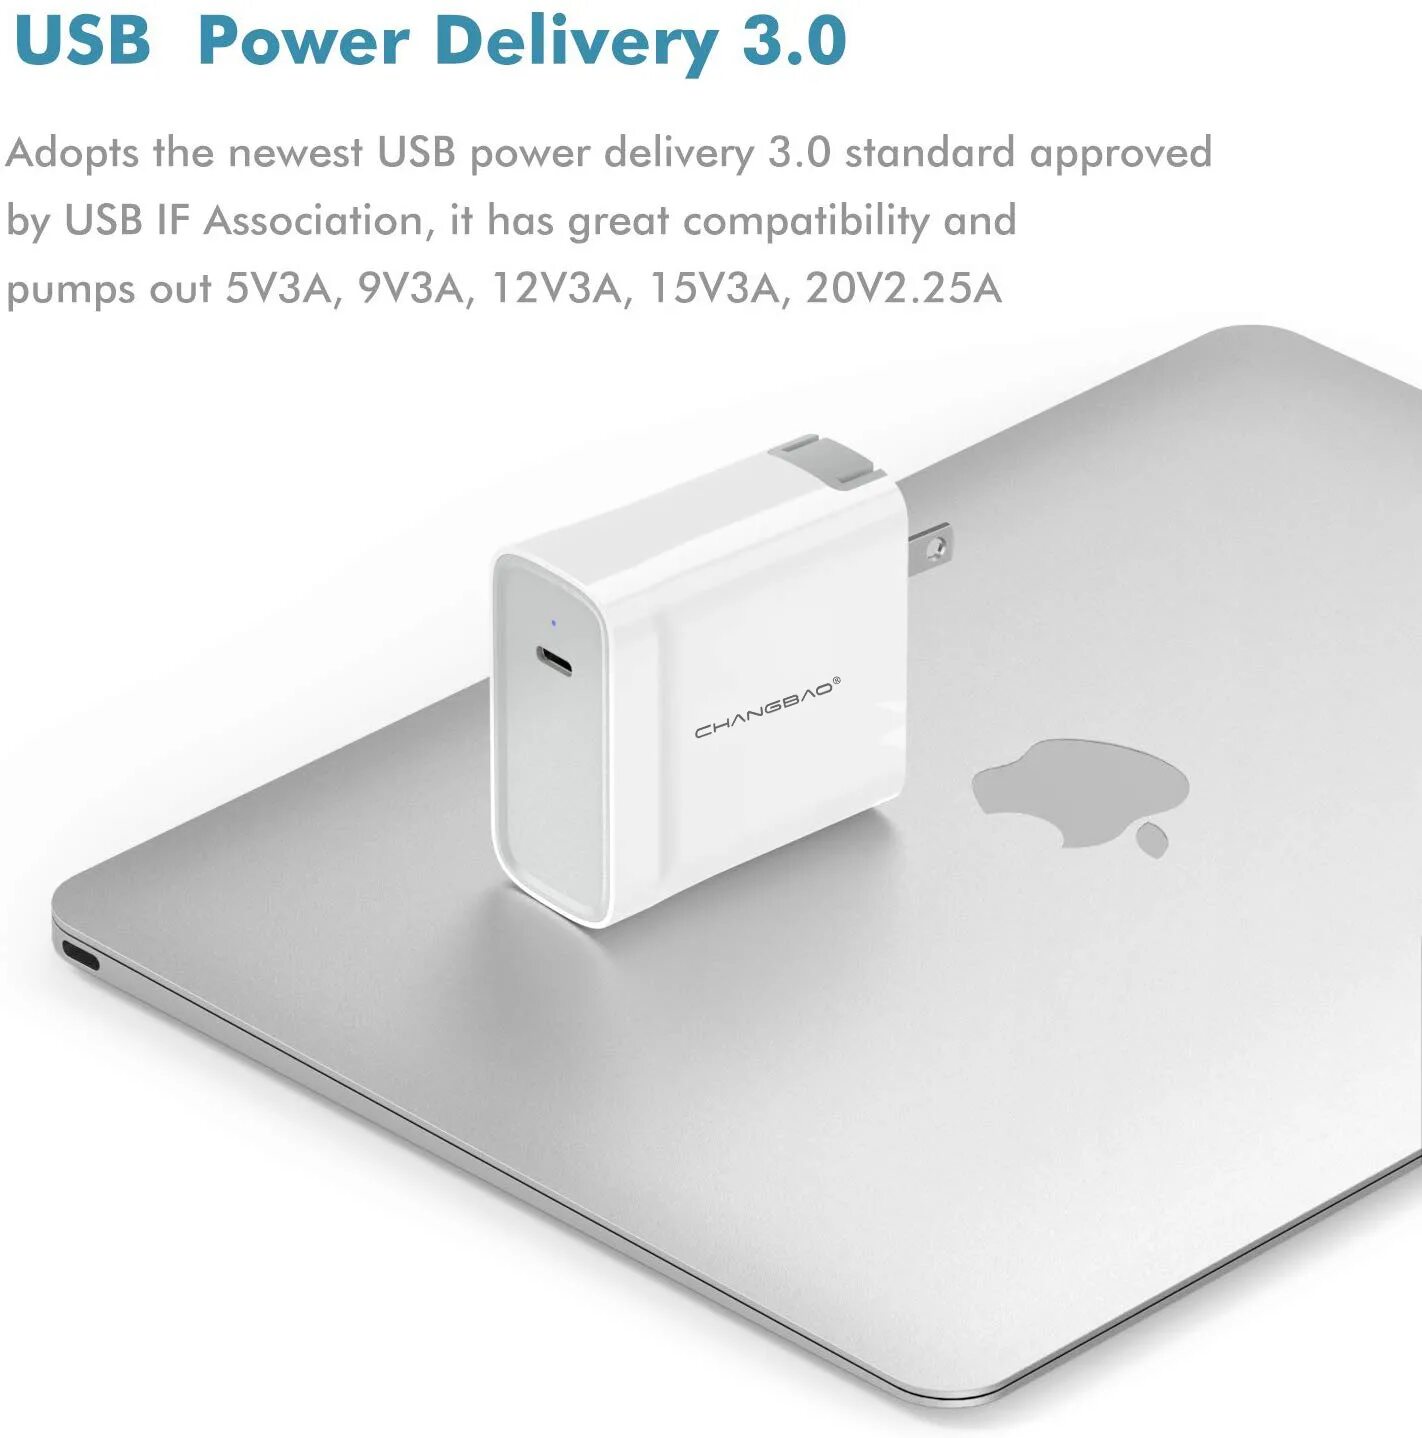 Usb c power delivery. 45w PD Adapter Apple. USB Power delivery (PD). Power delivery 3.0.